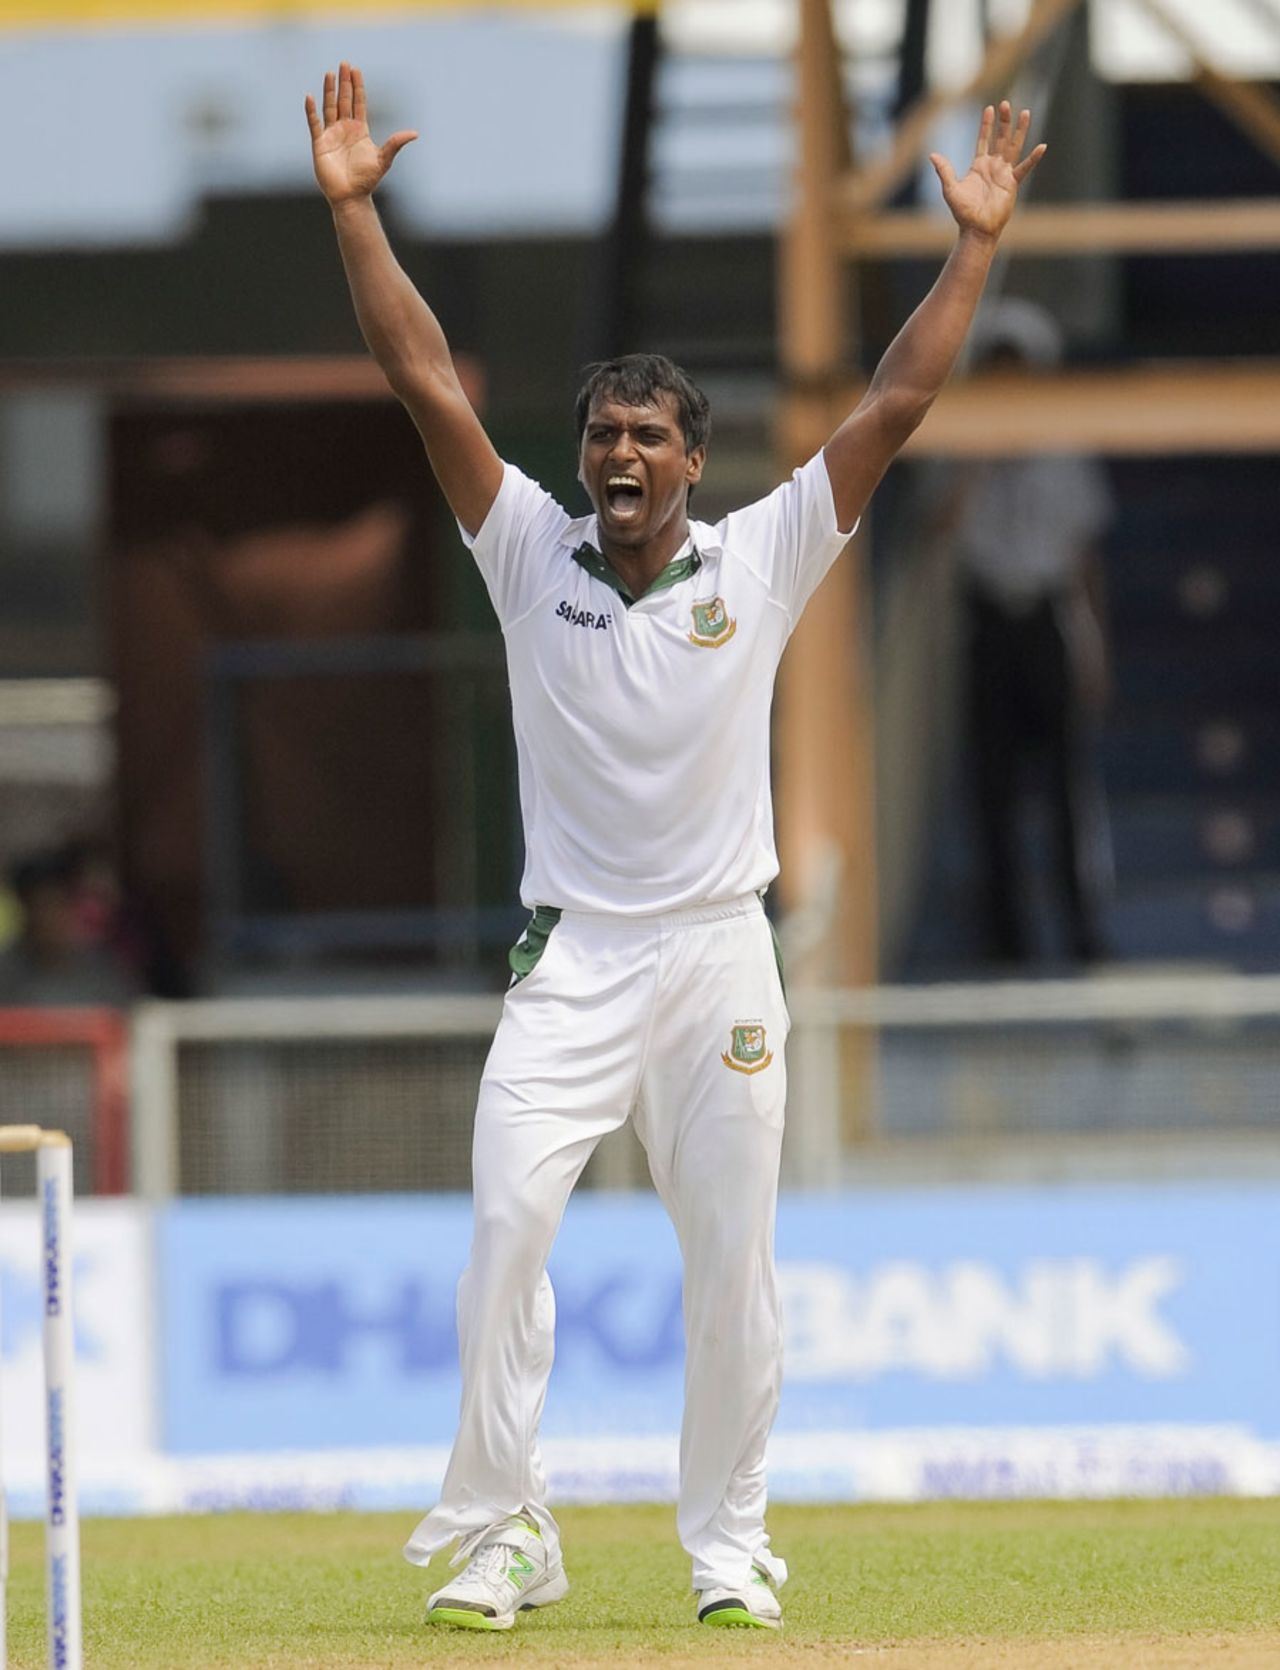 Rubel Hossain picked up his first wicket after 28 overs, West Indies v Bangladesh, 1st Test,  St Vincent, 3rd day, September 7, 2014